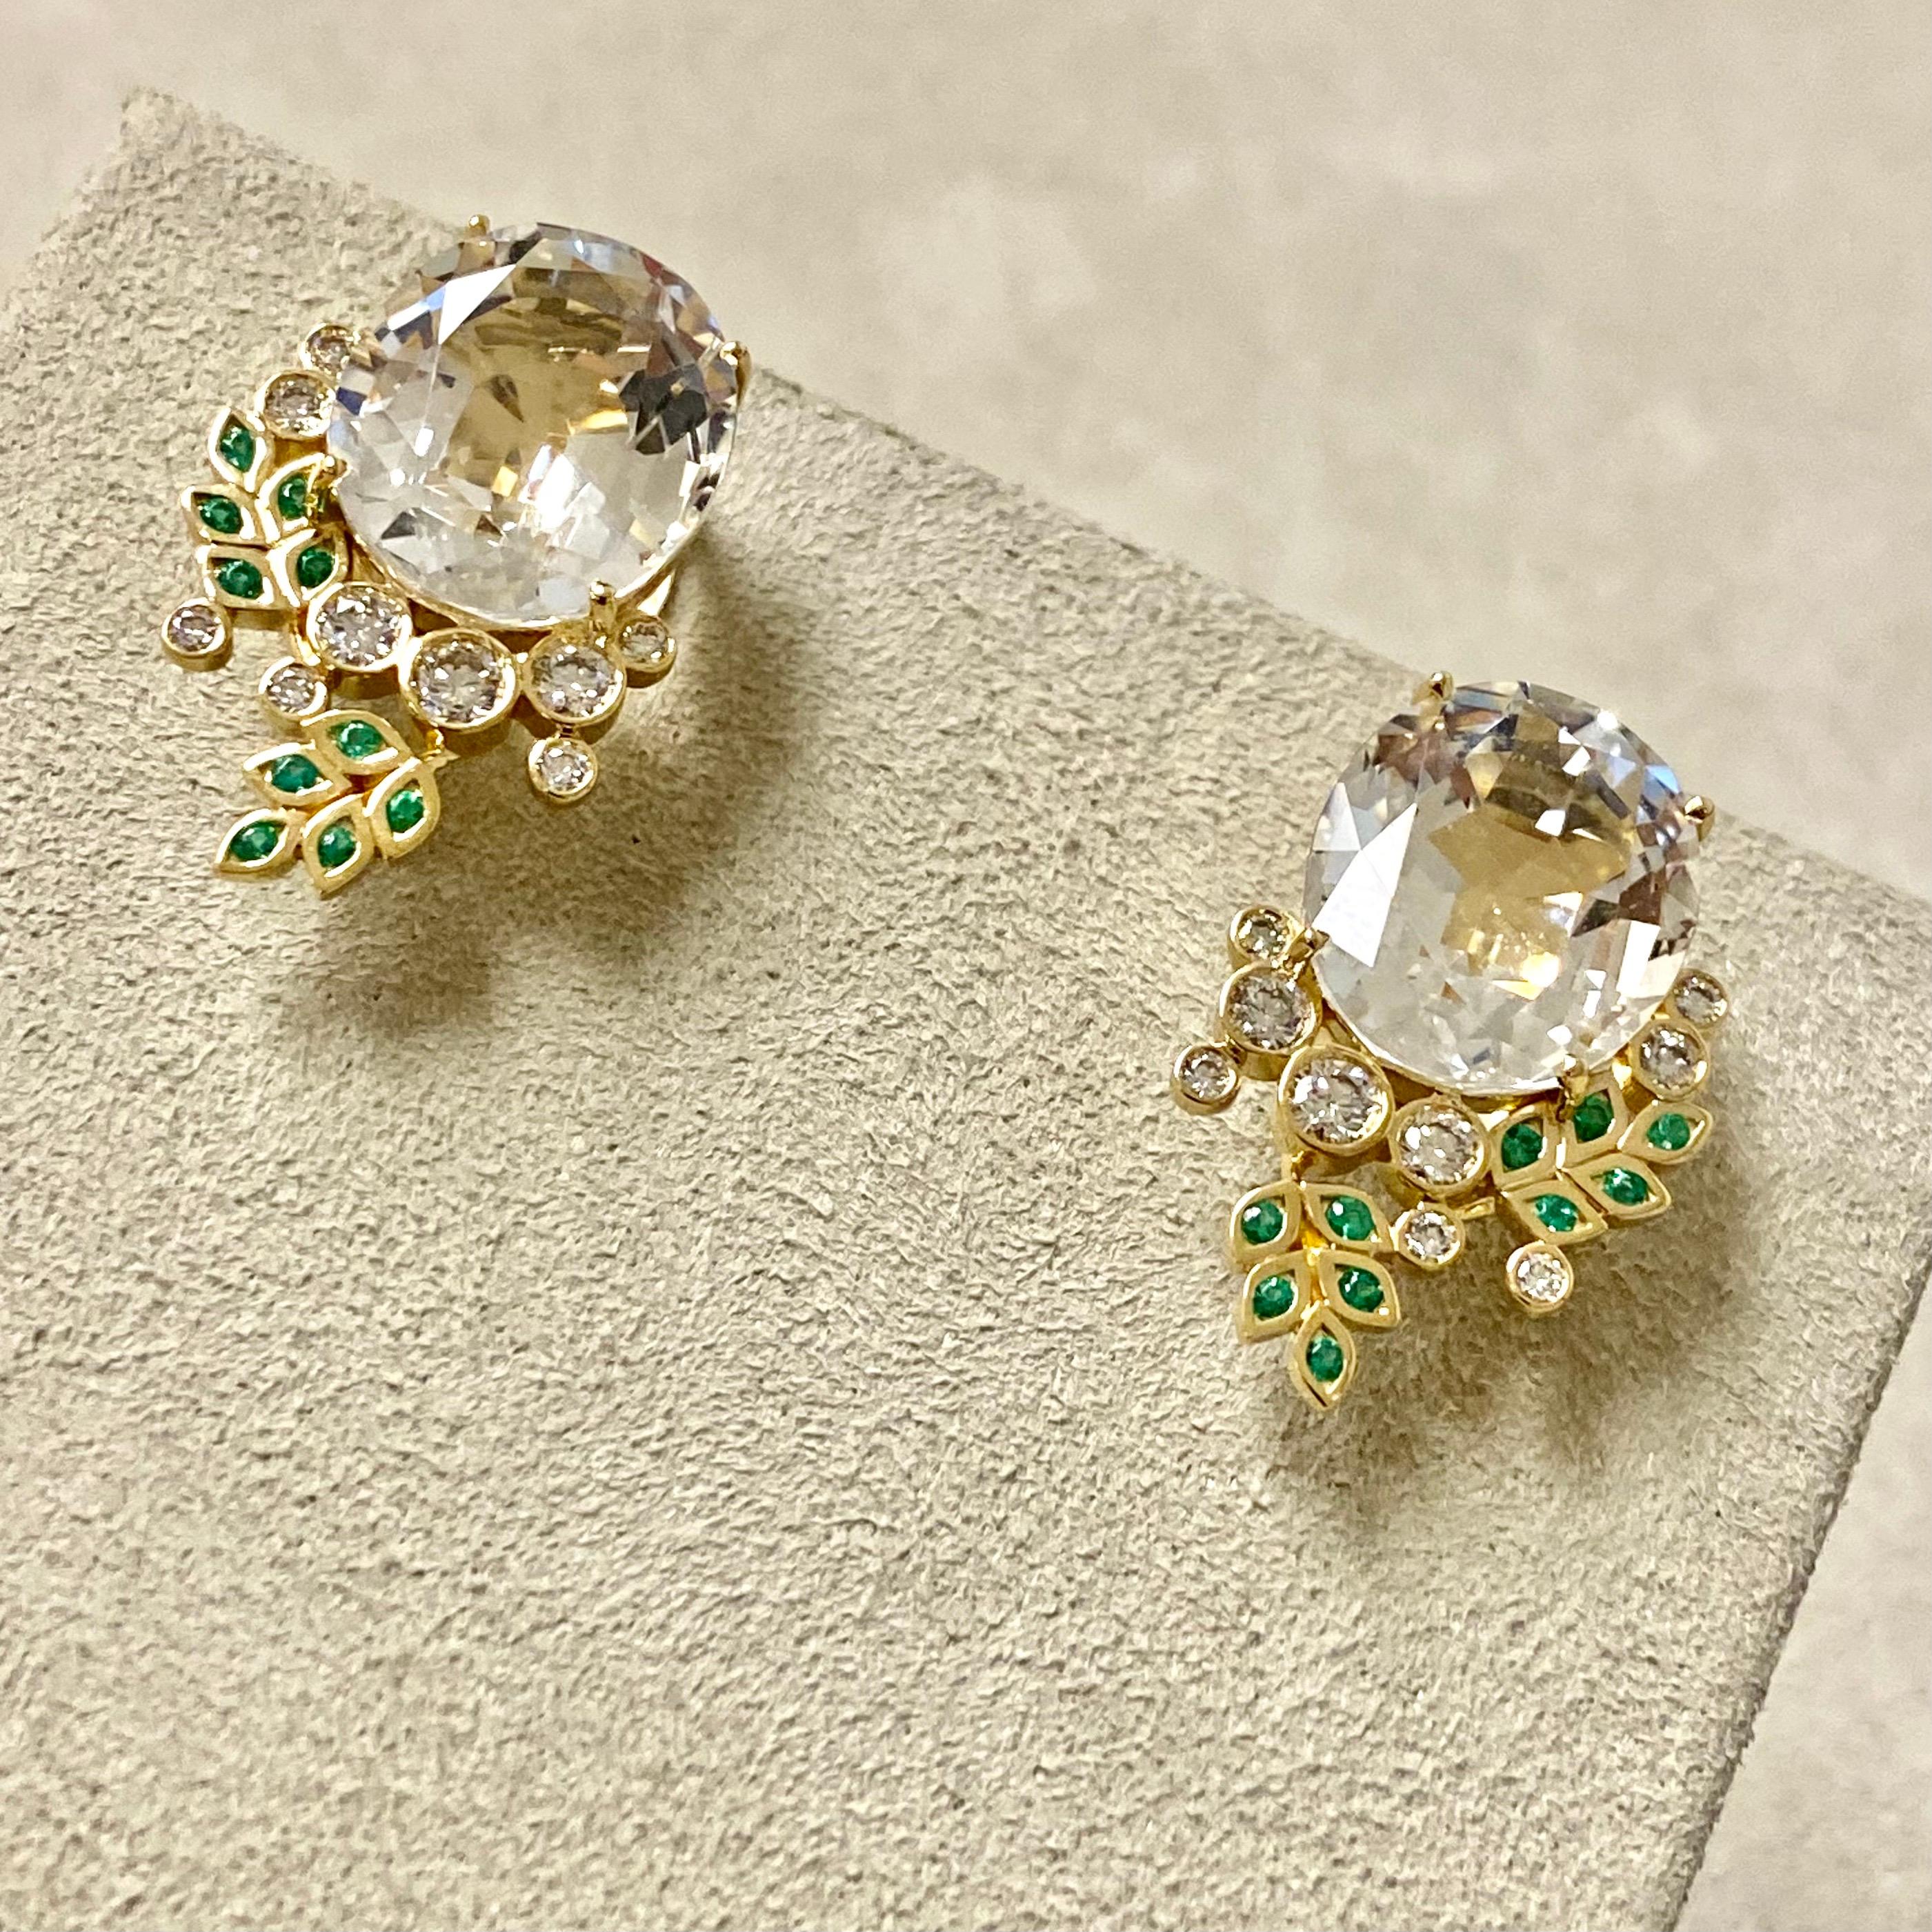 Created in 18 karat yellow gold
Rock Crystal 15 carats approx.
Emeralds 0.15 carat approx.
Champagne diamonds 0.60 carat approx.
Limited Edition


About the Designers

Drawing inspiration from little things, Dharmesh & Namrata Kothari have created